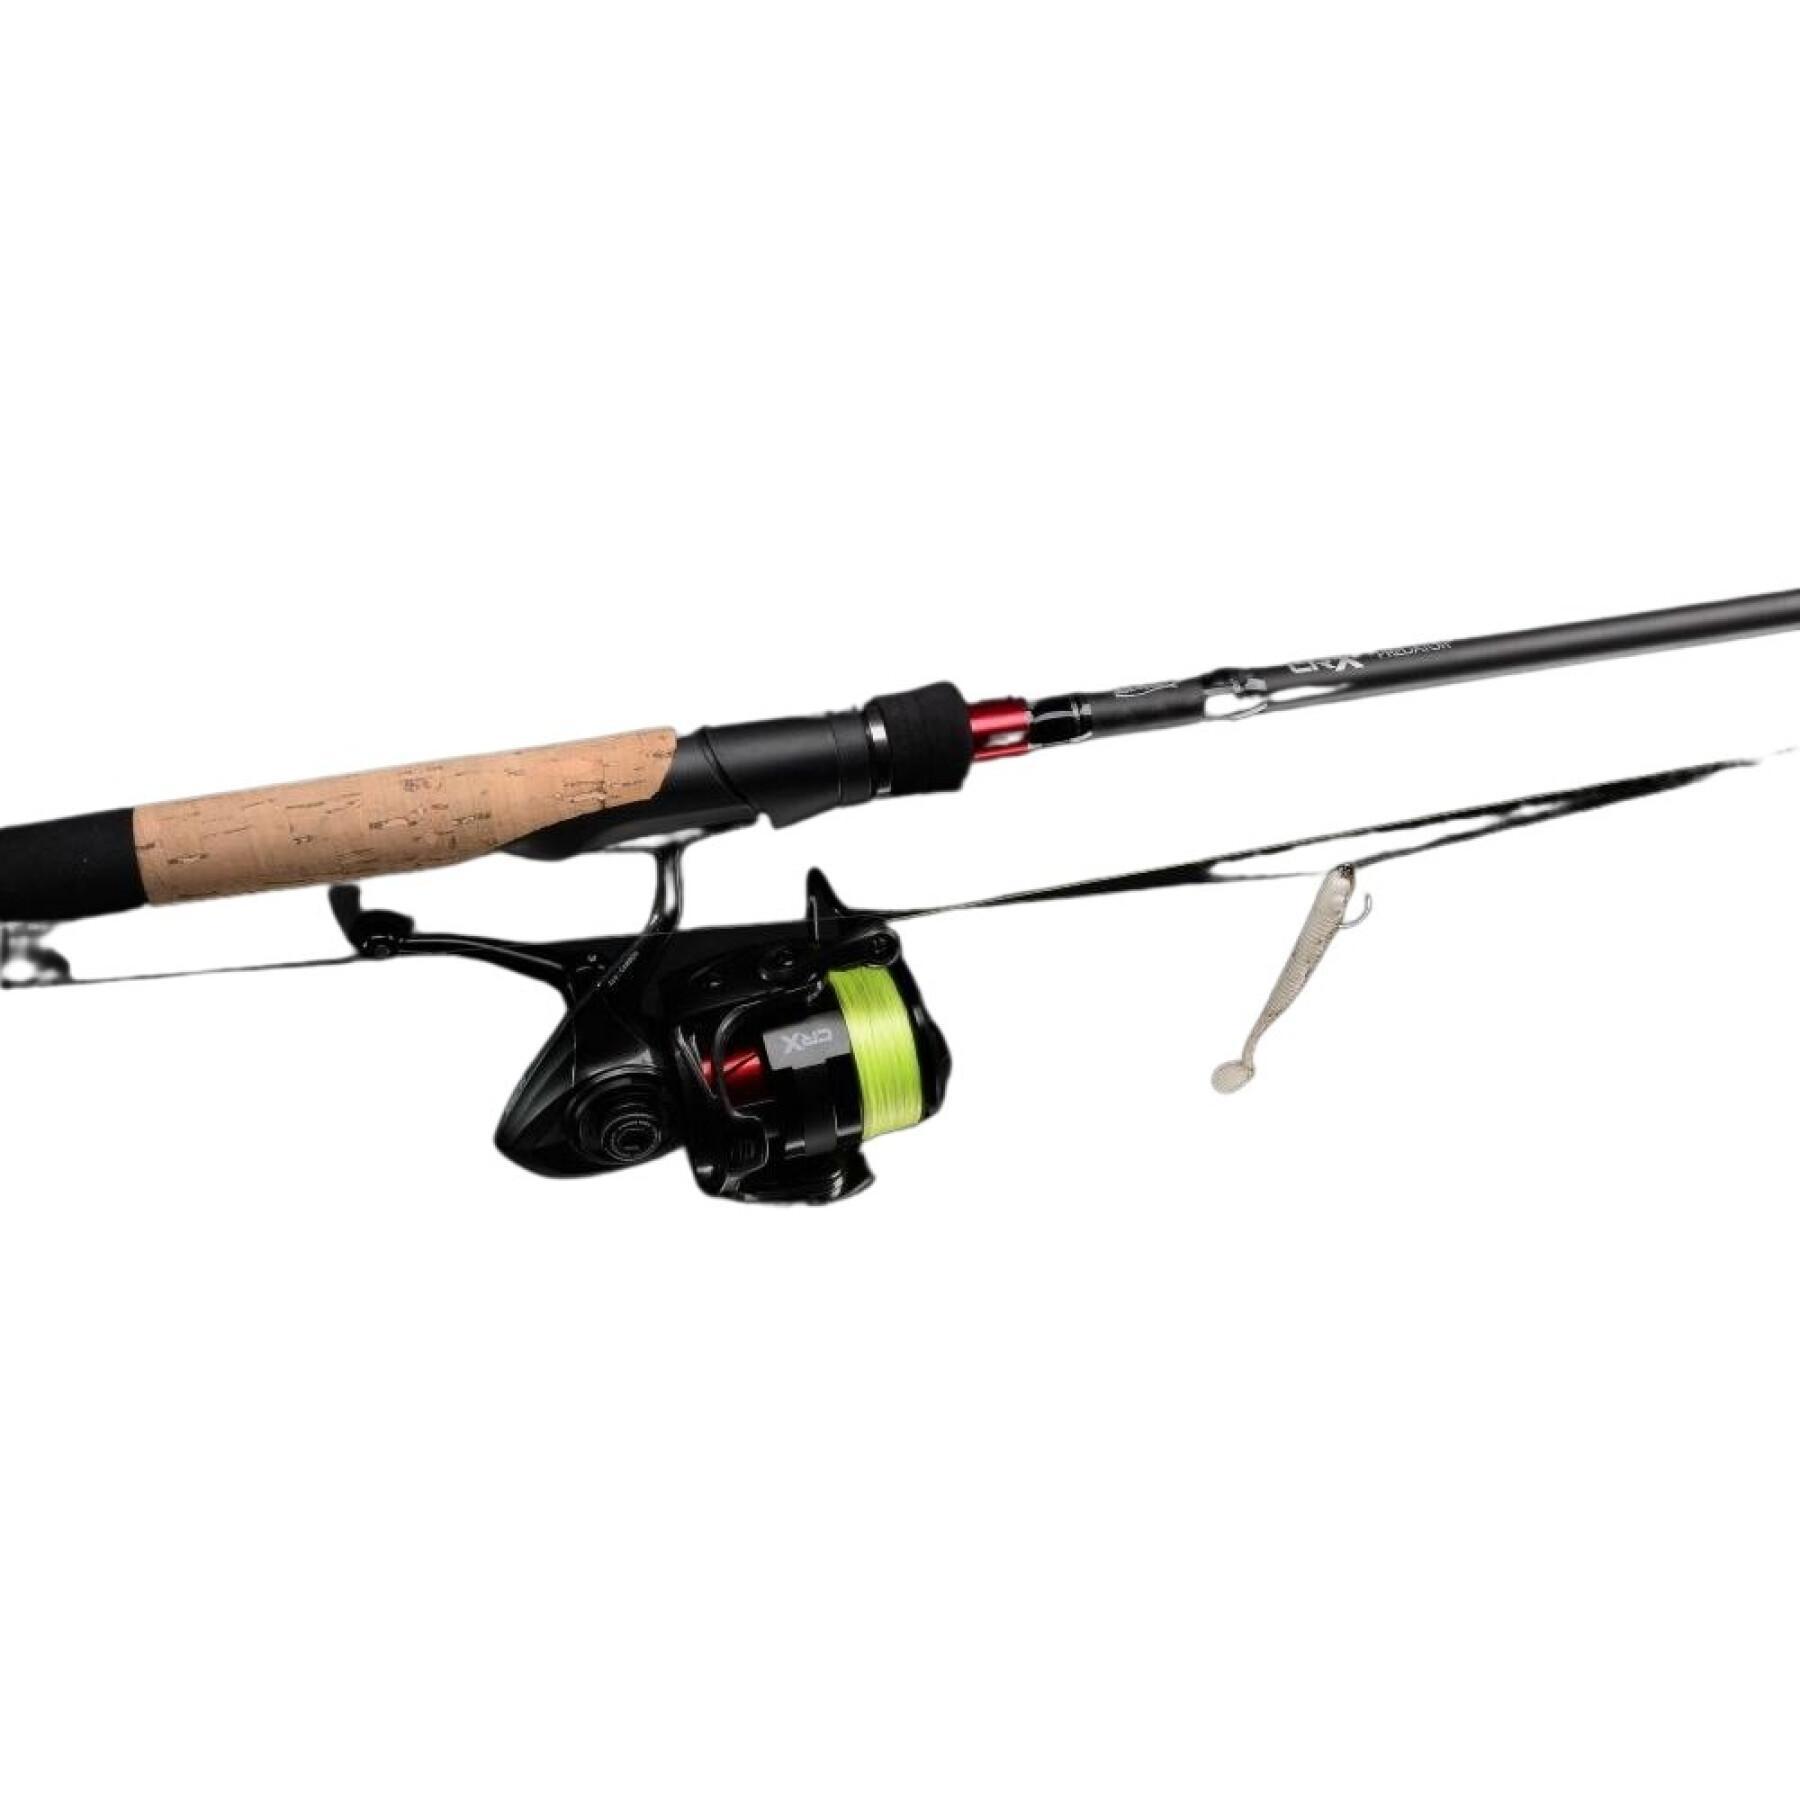 Spinning rod Spro Crx Dropshot & Finesse 4-21g